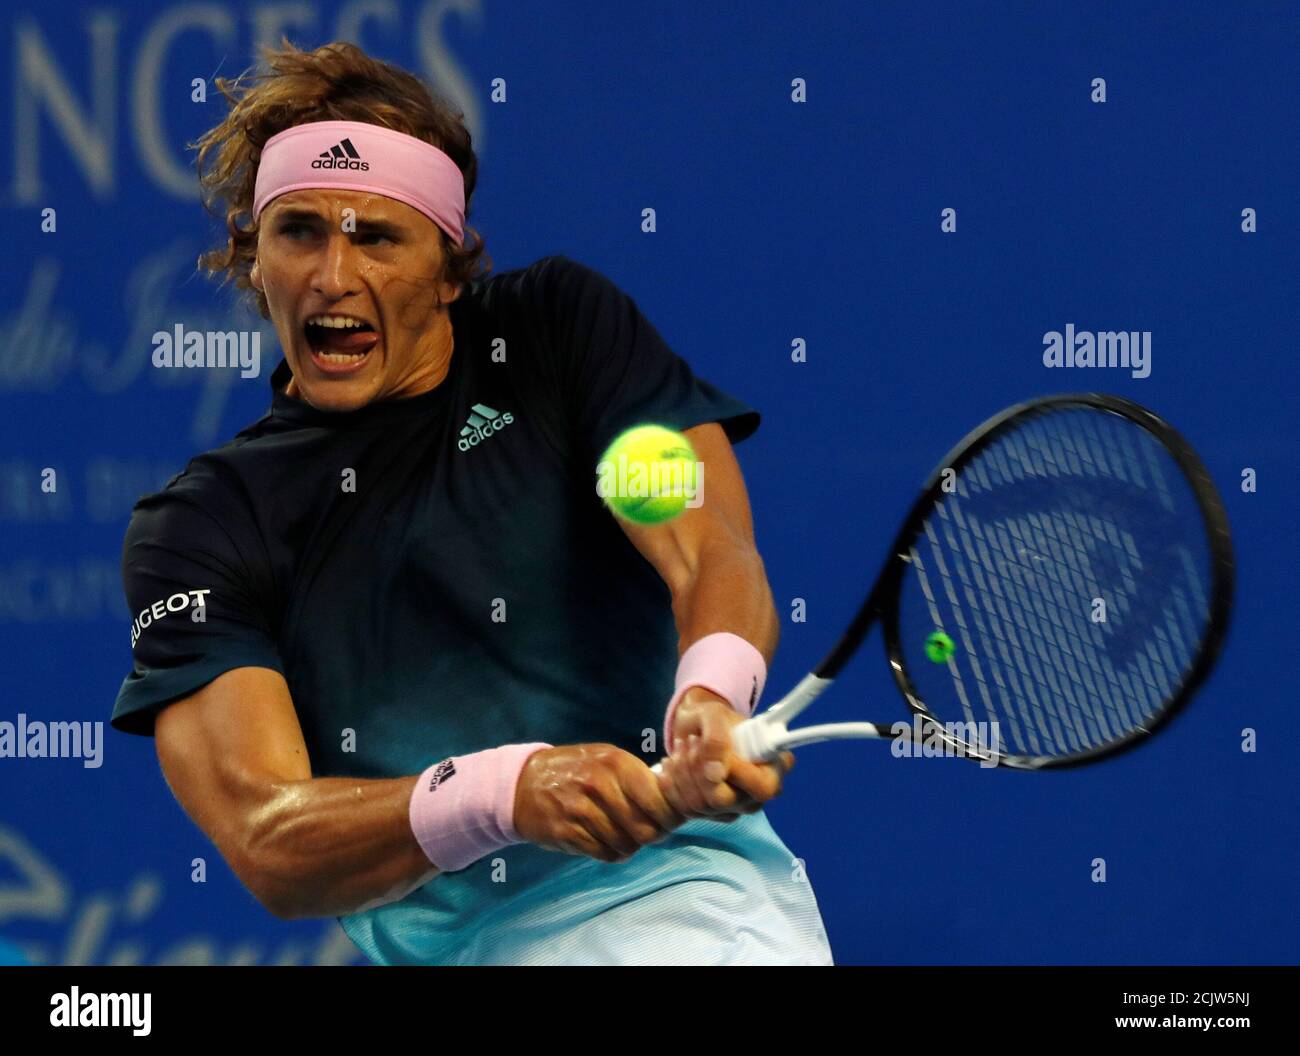 Tennis - ATP 500 - Acapulco Open, Acapulco, Mexico - March 1, 2019  Germany's Alexander Zverev in action during his match against Britain's  Cameron Norrie REUTERS/Henry Romero Stock Photo - Alamy